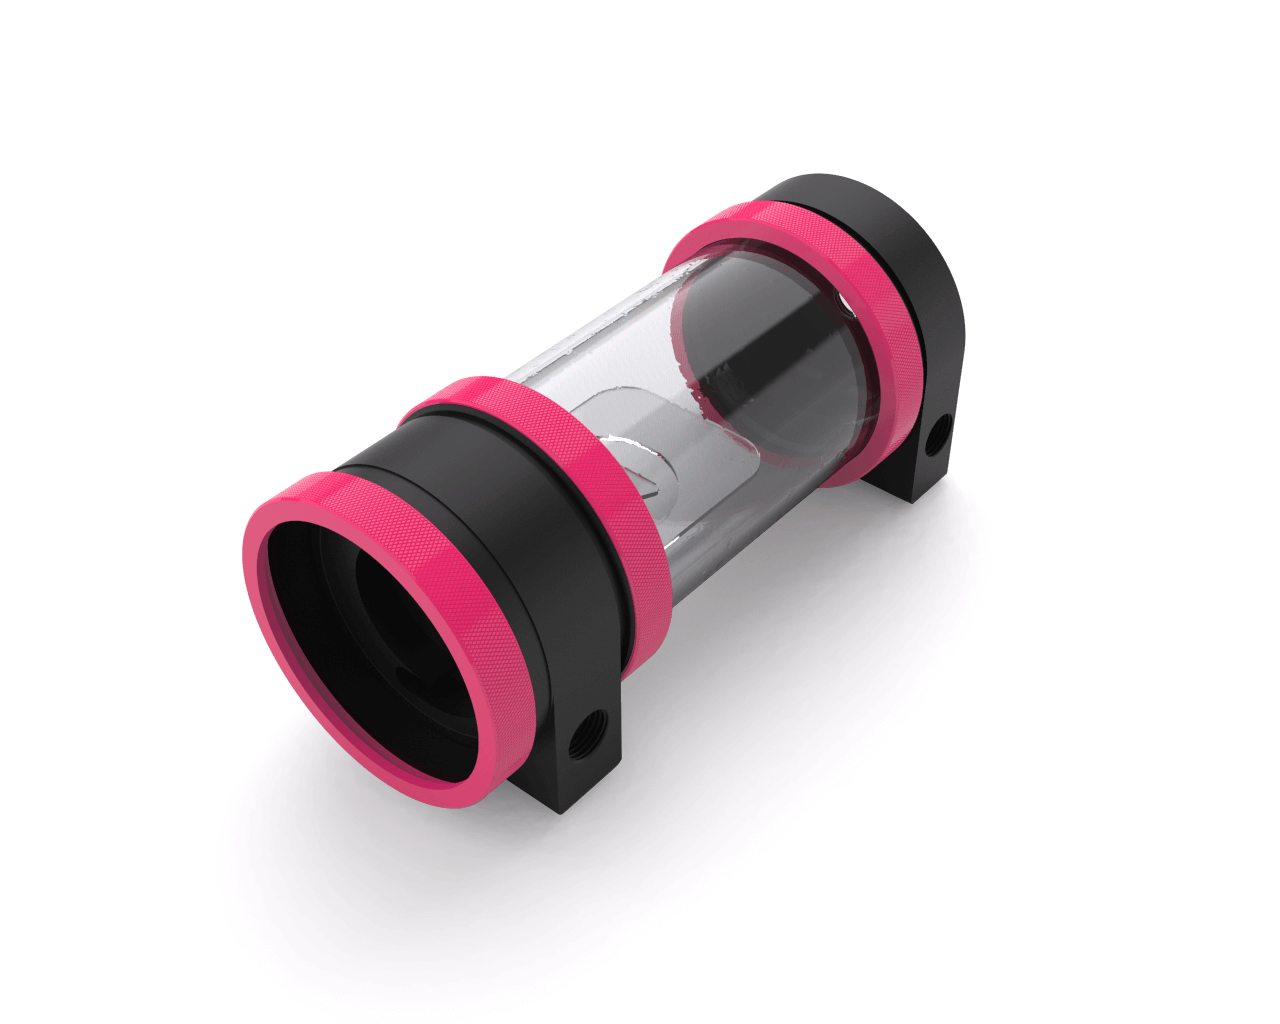 PrimoChill CTR Hard Mount Phase II High Flow D5 Enabled Reservoir - Black POM - 120mm - PrimoChill - KEEPING IT COOL UV Pink